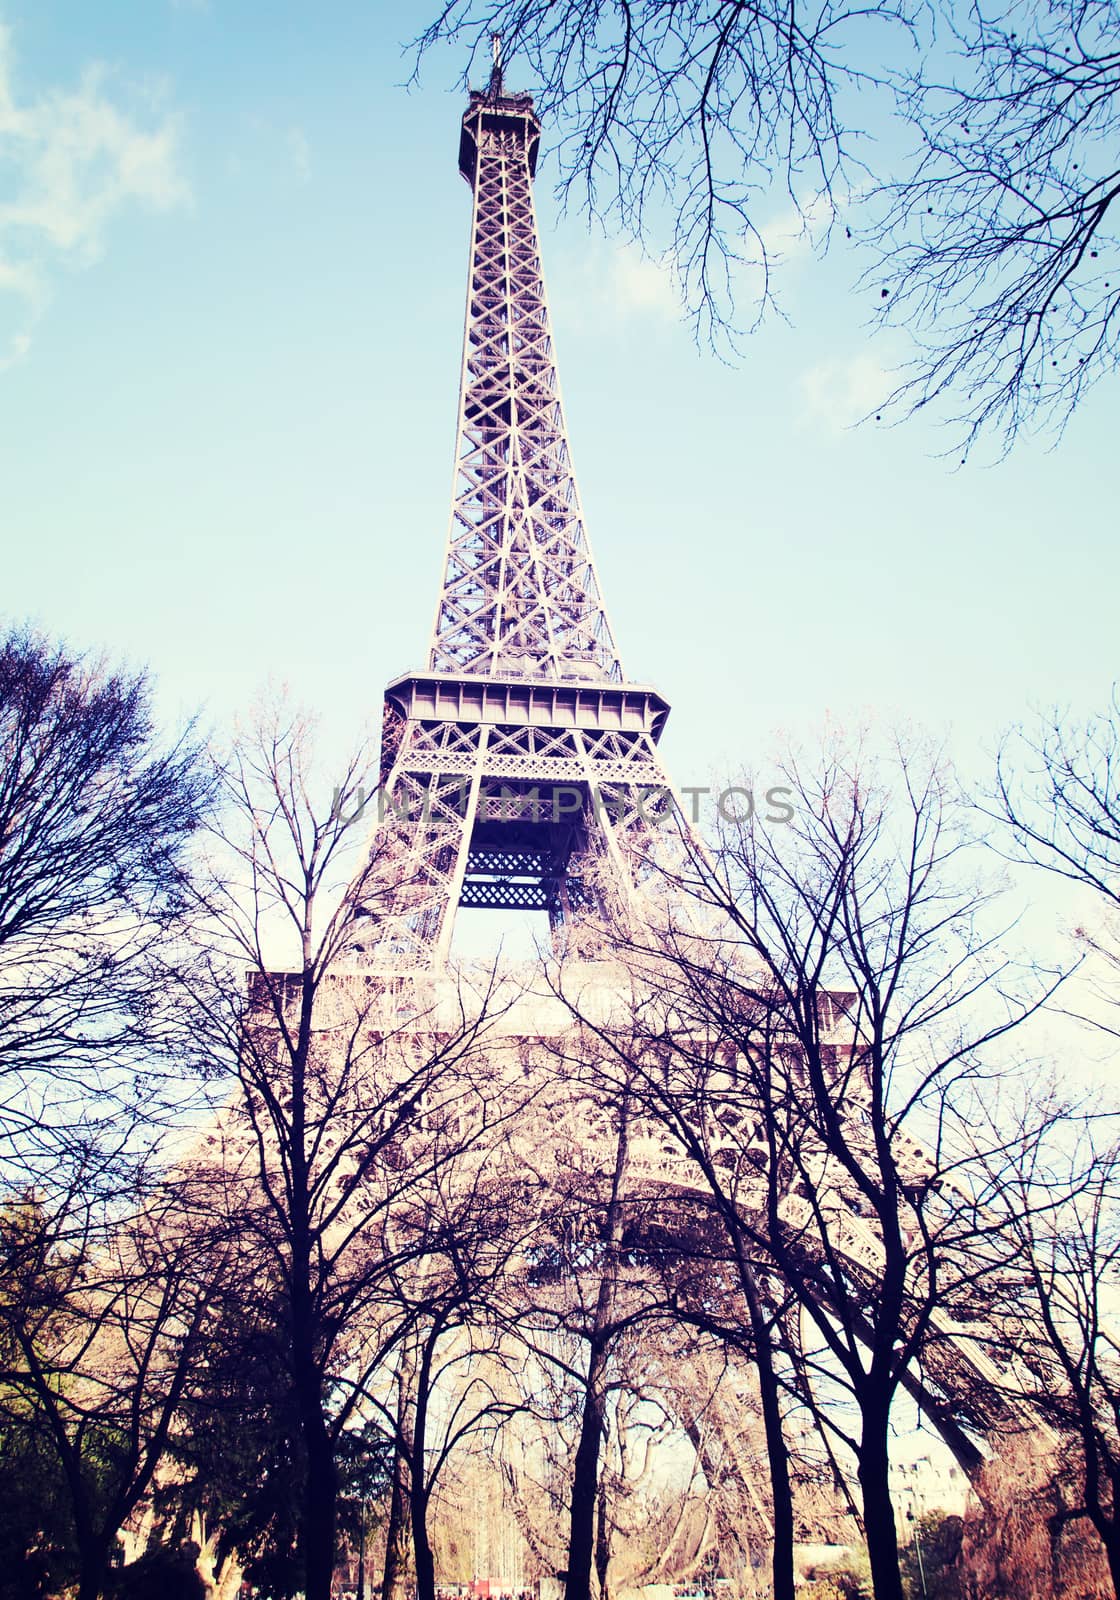 Eiffel Tower at day in Paris, France. Vintage